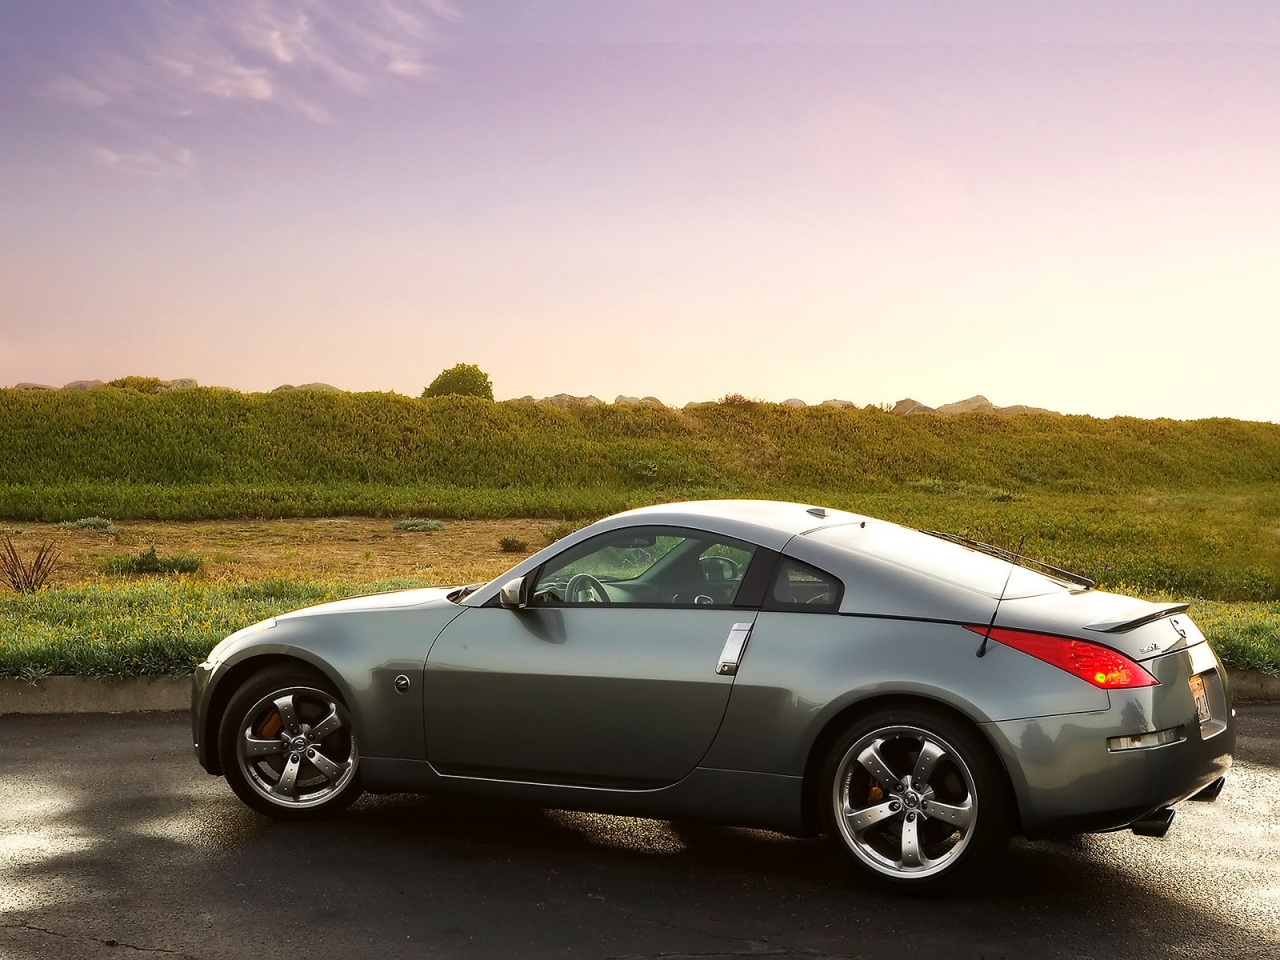 2007 Nissan 350Z for 1280 x 960 resolution